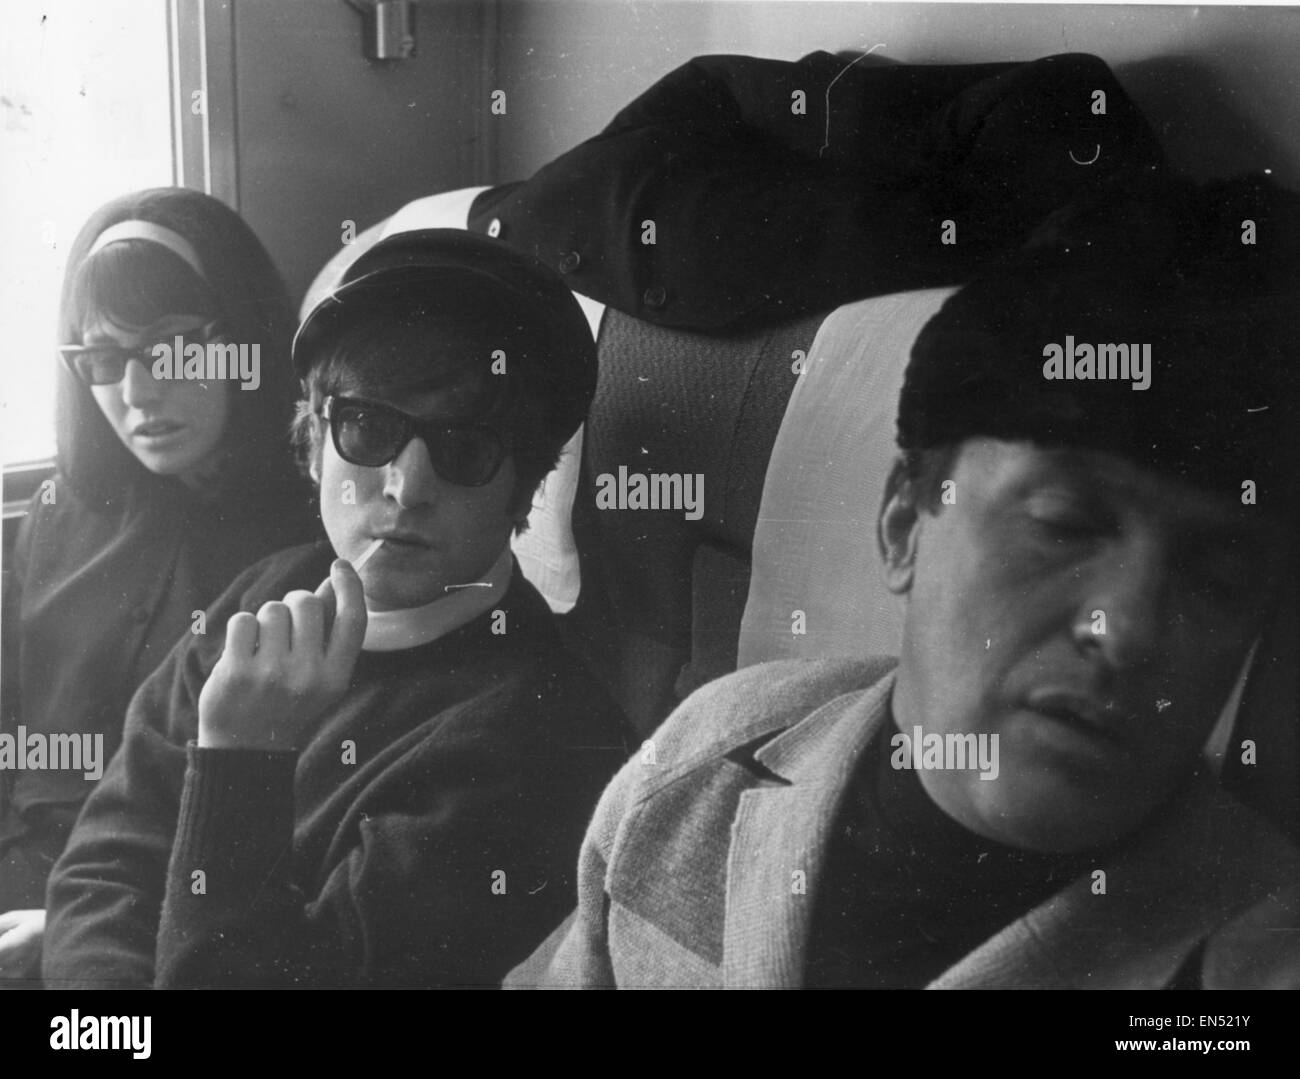 John Lennon & wife Cynthia Lennon on board train for Washington D.C. February 1964. Evaluation Scan Only - If you require a high resolution copy, please contact desk@mirrorpix.com Stock Photo